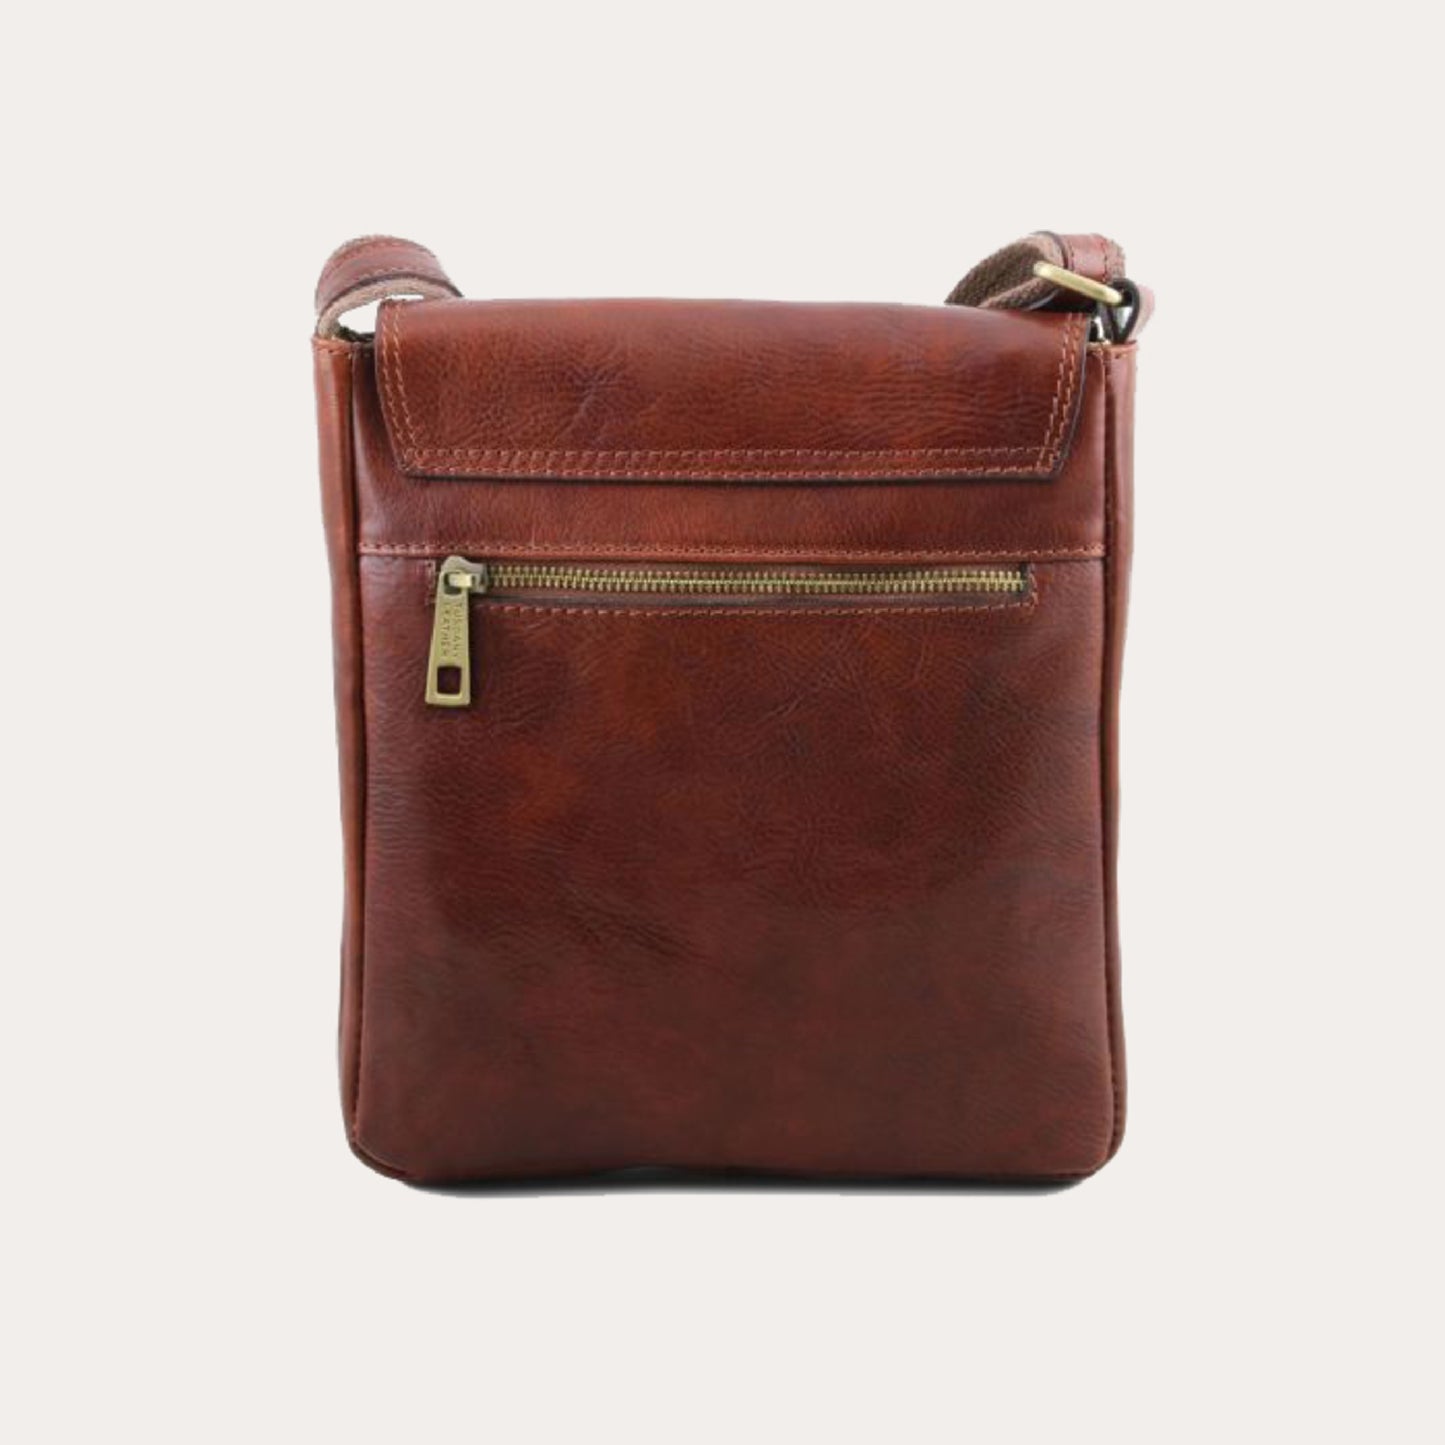 Tuscany Leather Brown Leather Crossbody Bag